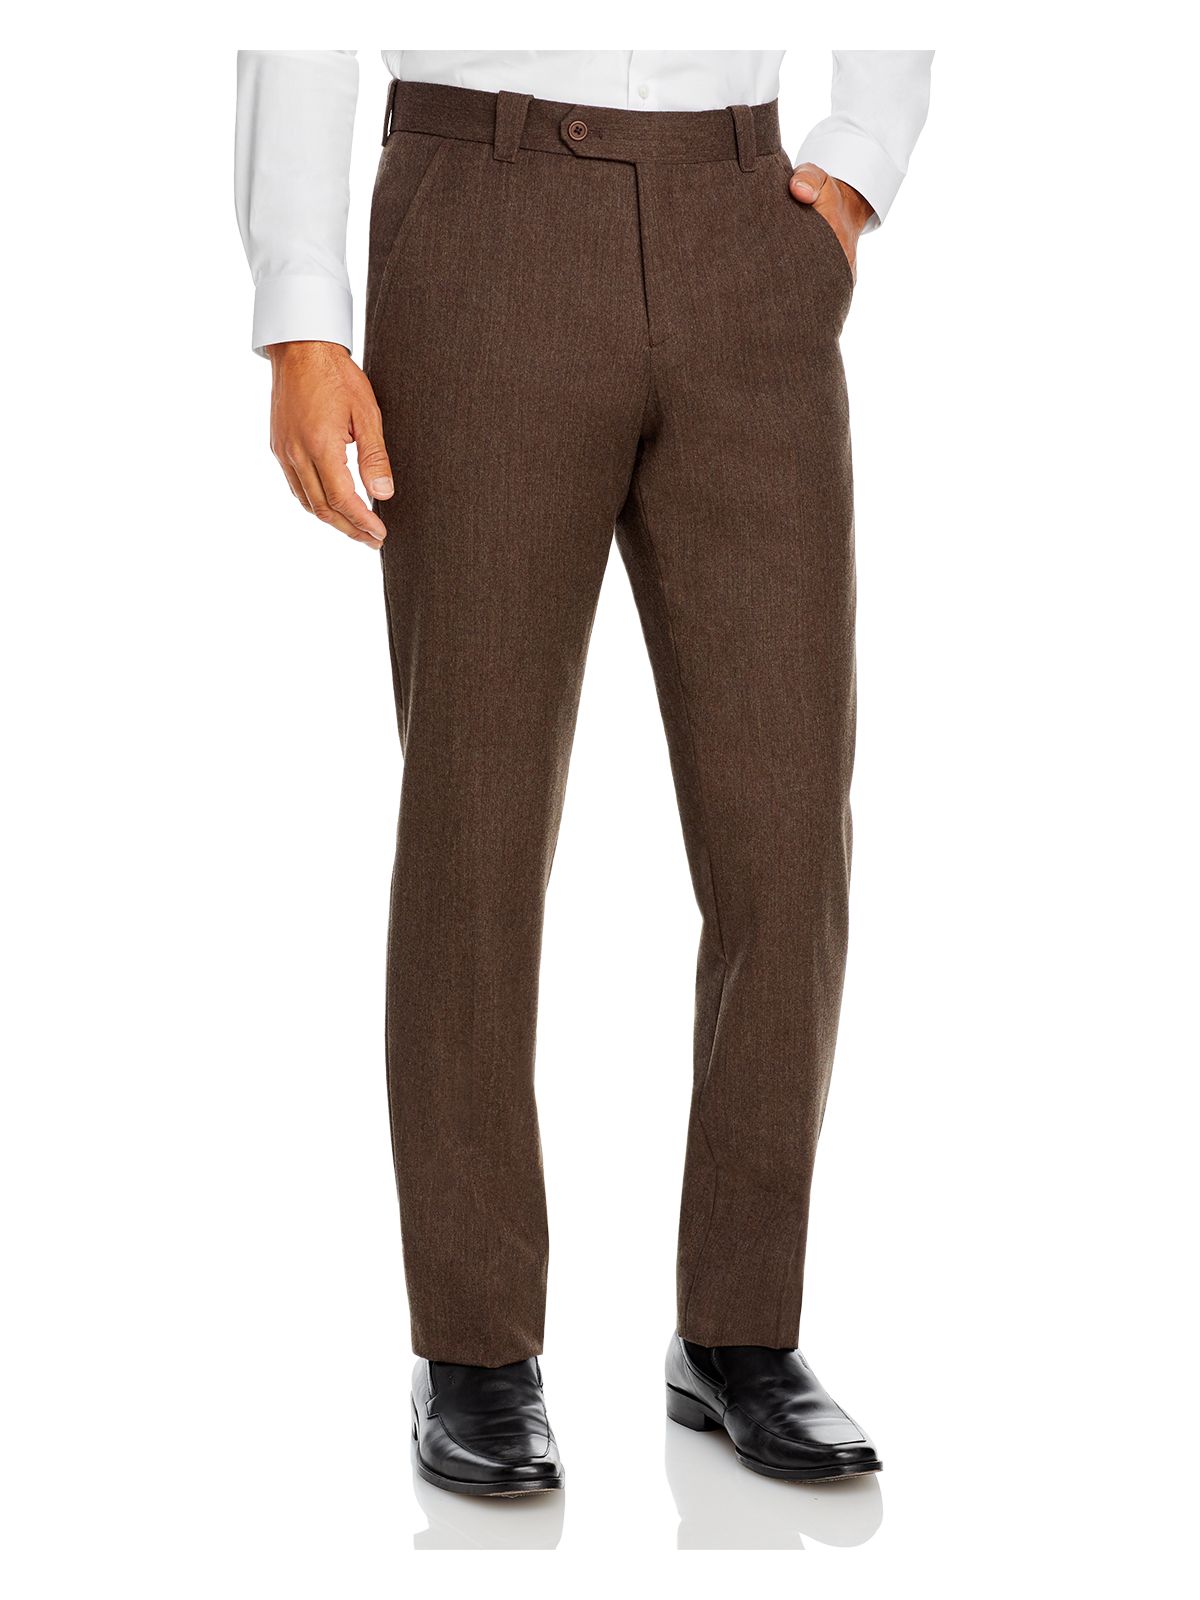 The Mens store Mens Brown Adjustable Waist, Heather Pants 34W/ 30L